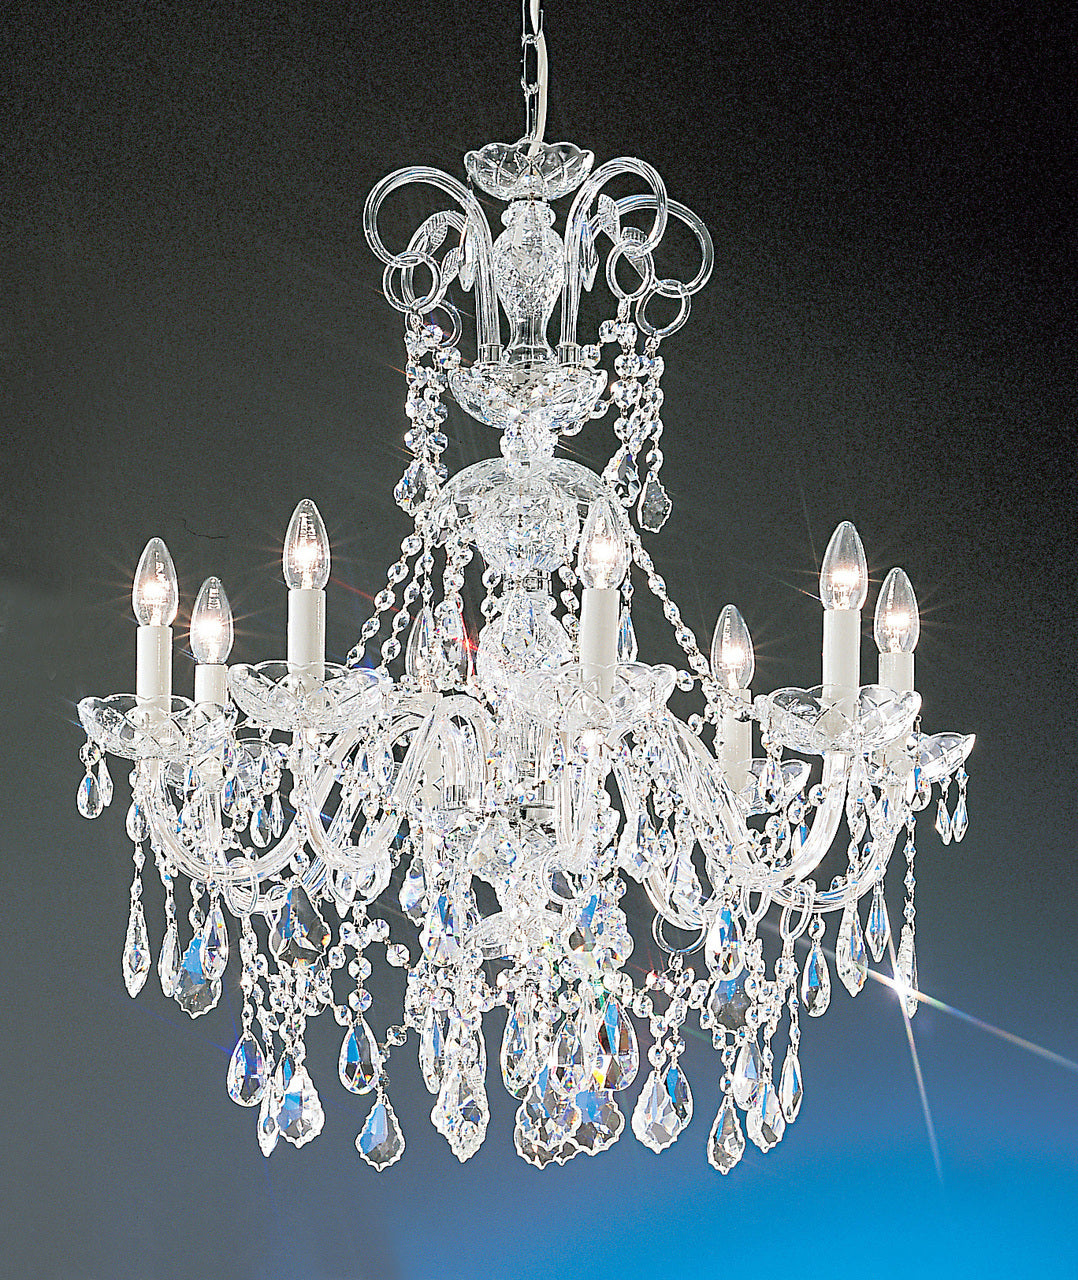 Classic Lighting 8261 G S Bohemia Crystal/Glass Chandelier in 24k Gold (Imported from Italy)